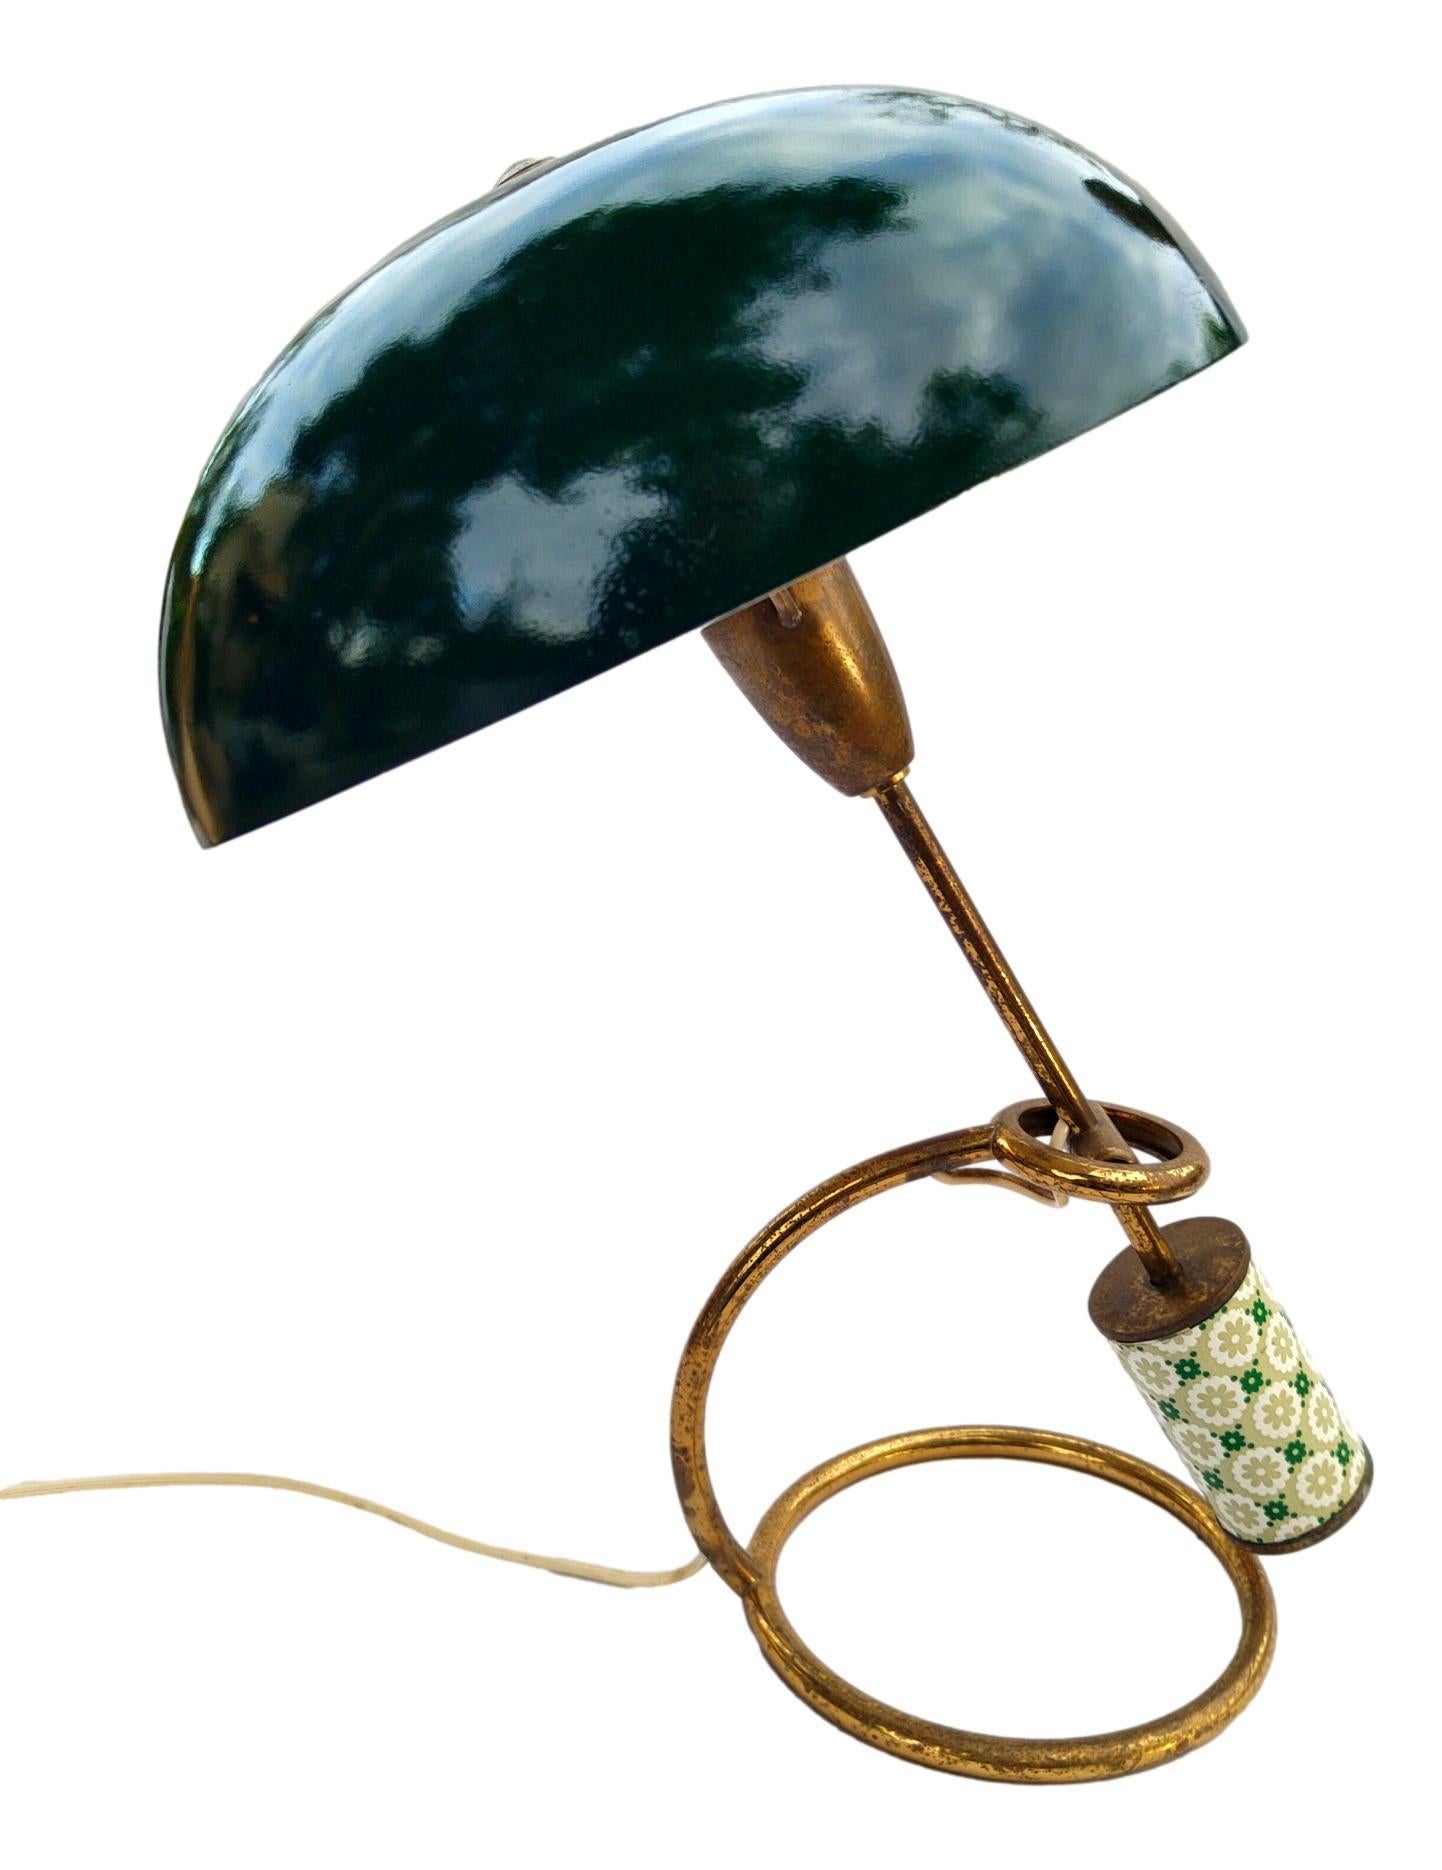 Angelo Lelii Arredoluce Table Lamp 12297 Scrittoio Model, Italy, 1950 In Good Condition For Sale In taranto, IT